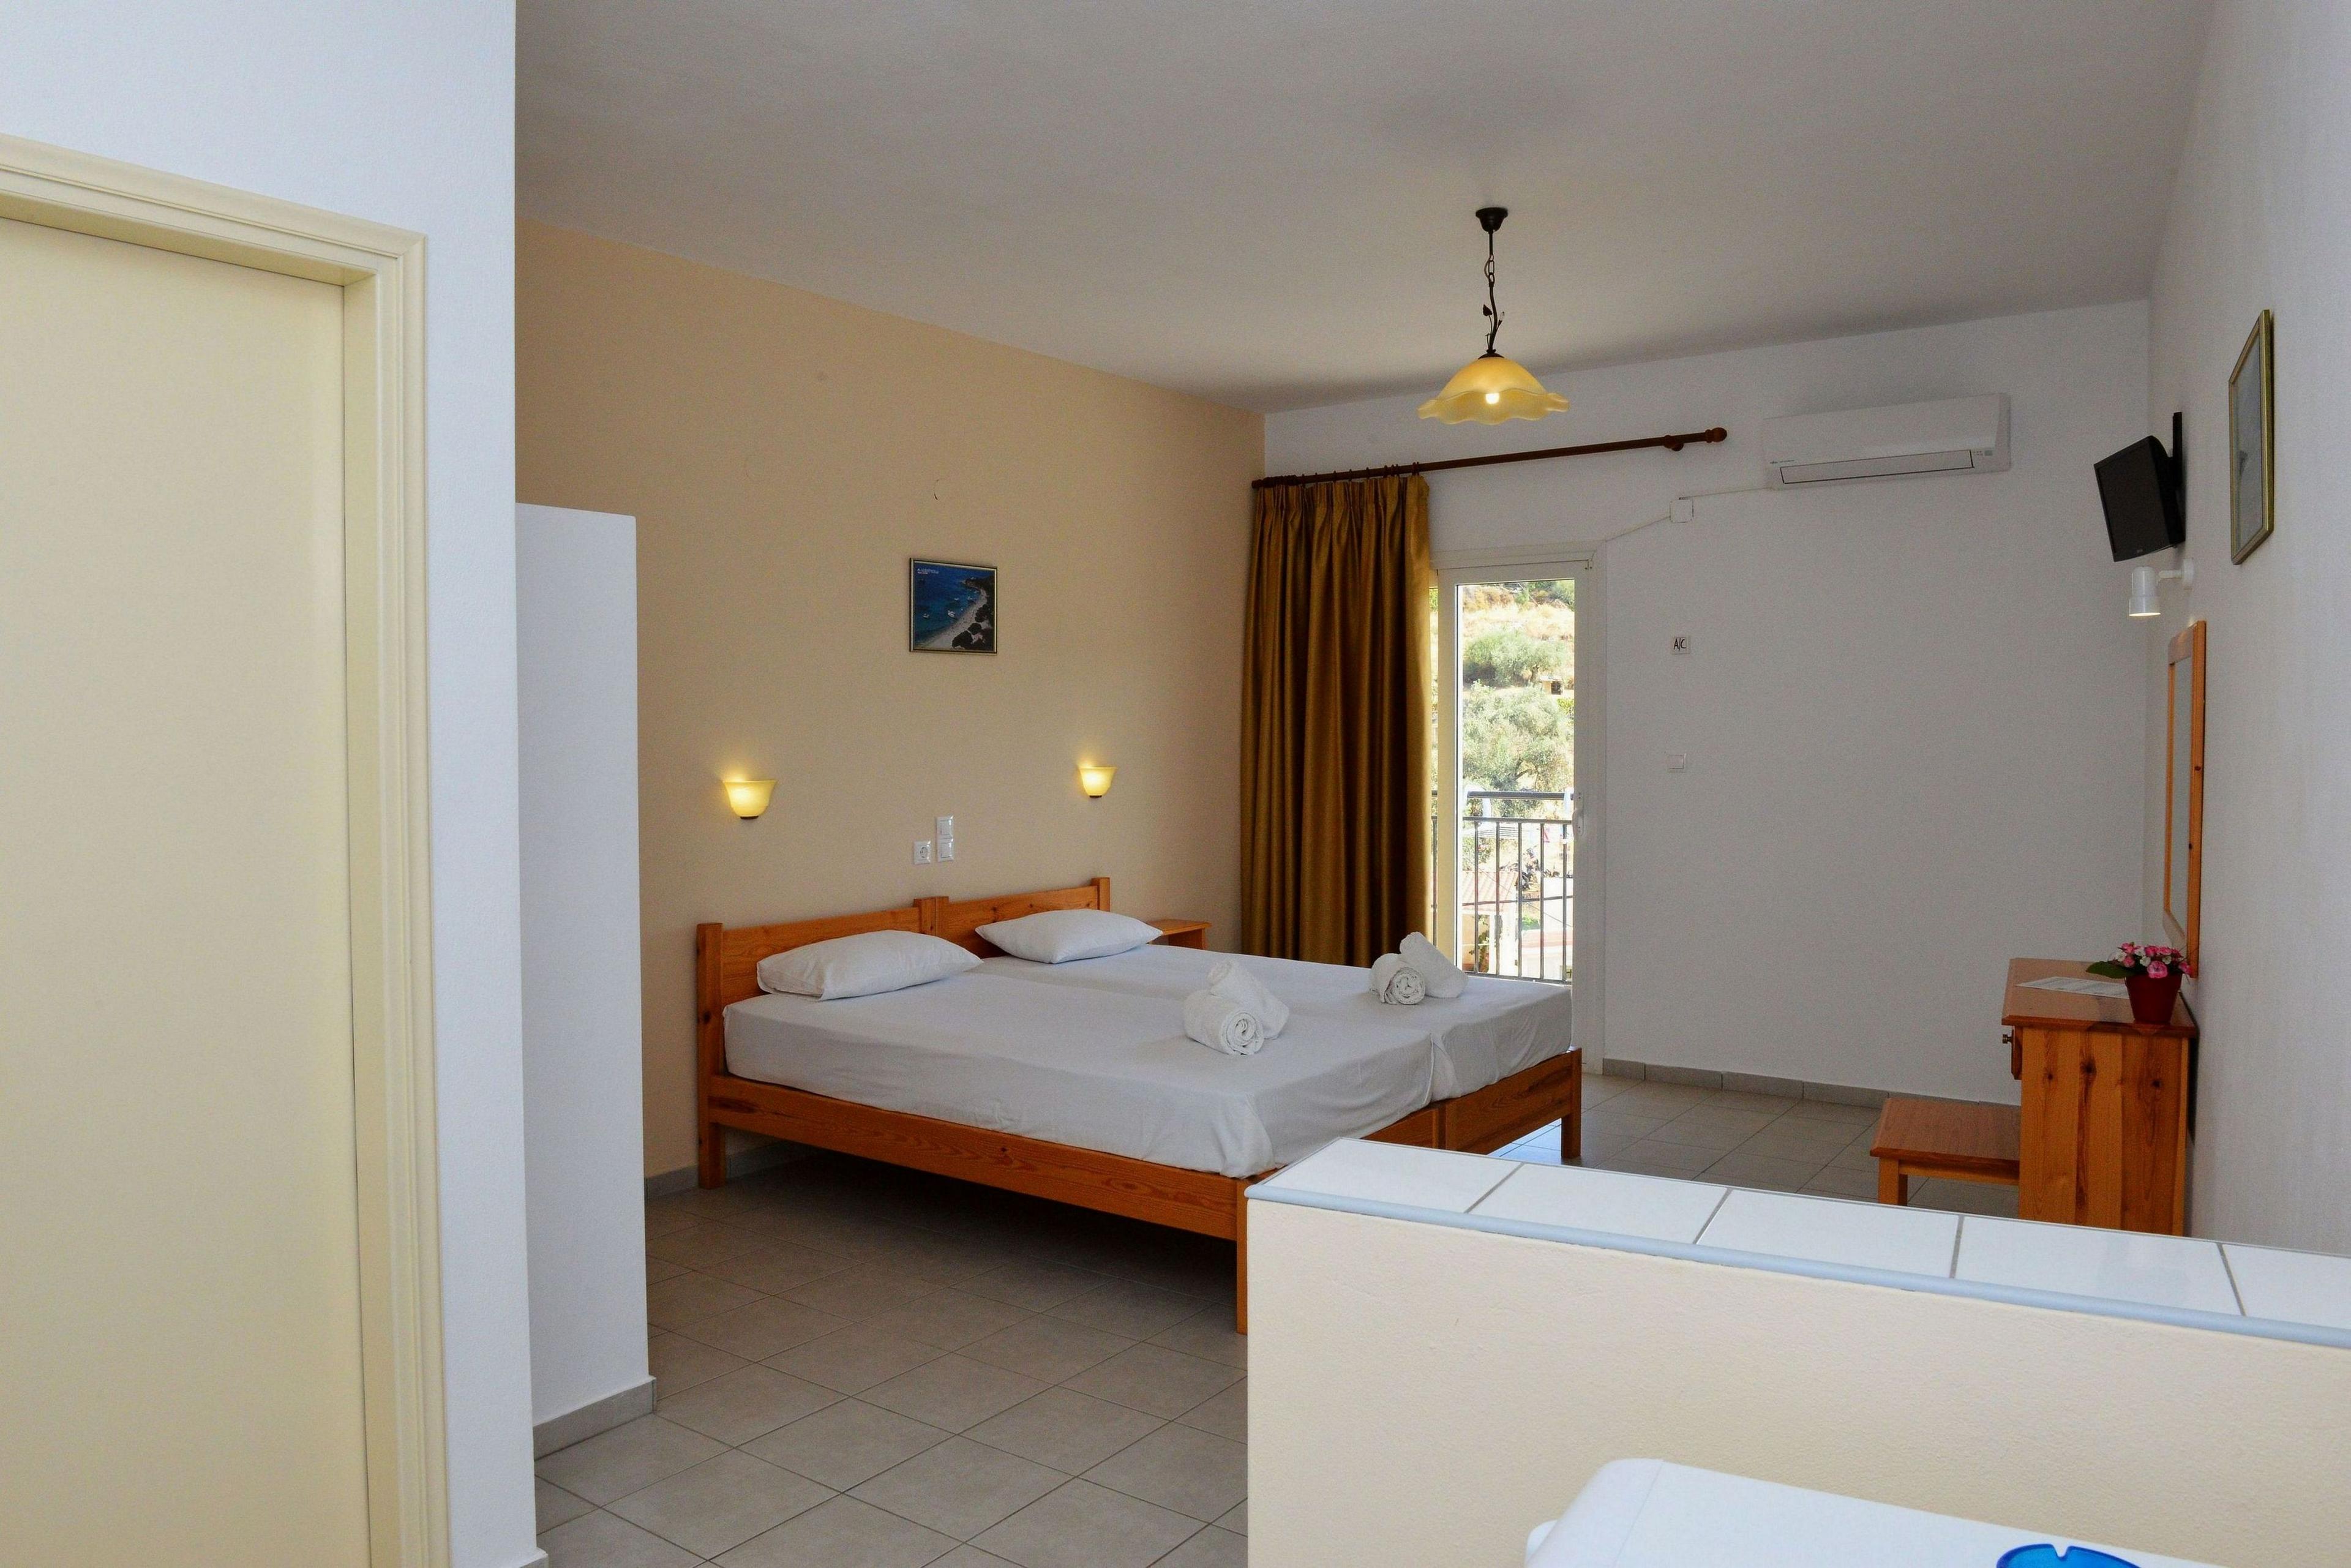 2 TWIN BEDS OR 1 DOUBLE BED, AIR-CONDITIONING, BALCONY, EQUIPPED TERRACE, BATHROOM WITH SHOWER, TOILET, HAIRDRYER-ON REQUEST, MIRROR, REFRIGERATOR, FLAT SCREEN TV, DAILY HOUSEKEEPING AND KETTLE ON REQUEST.